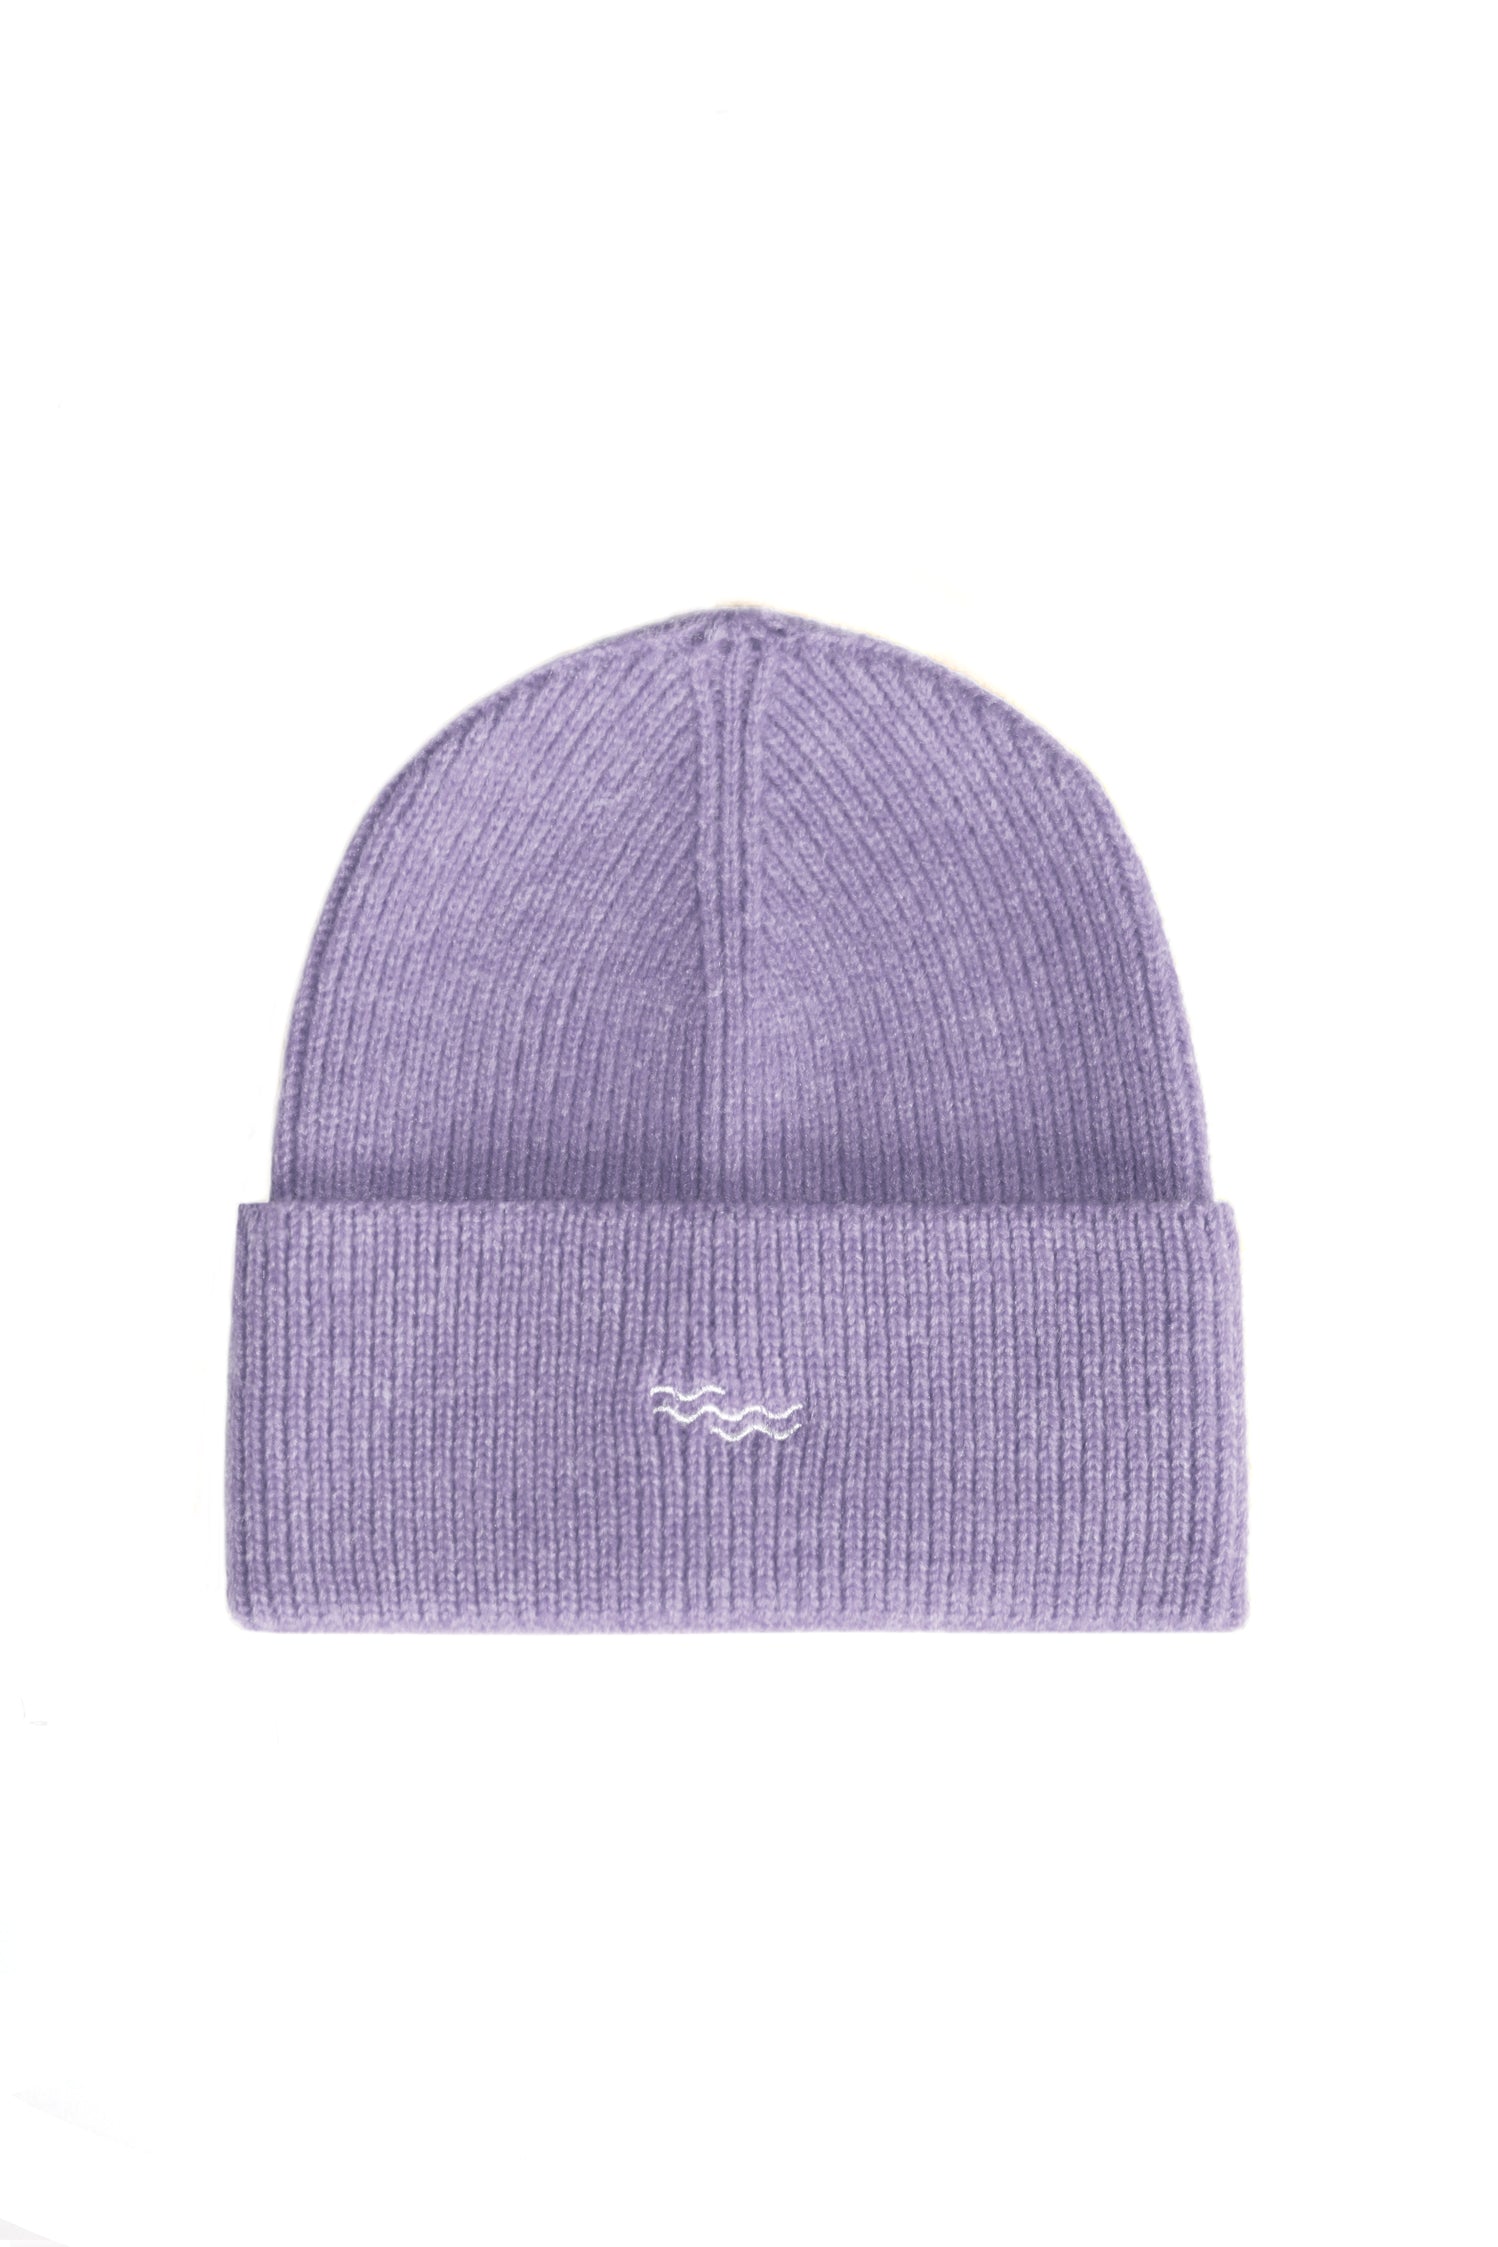 GRAPES KNITTED BEANIE